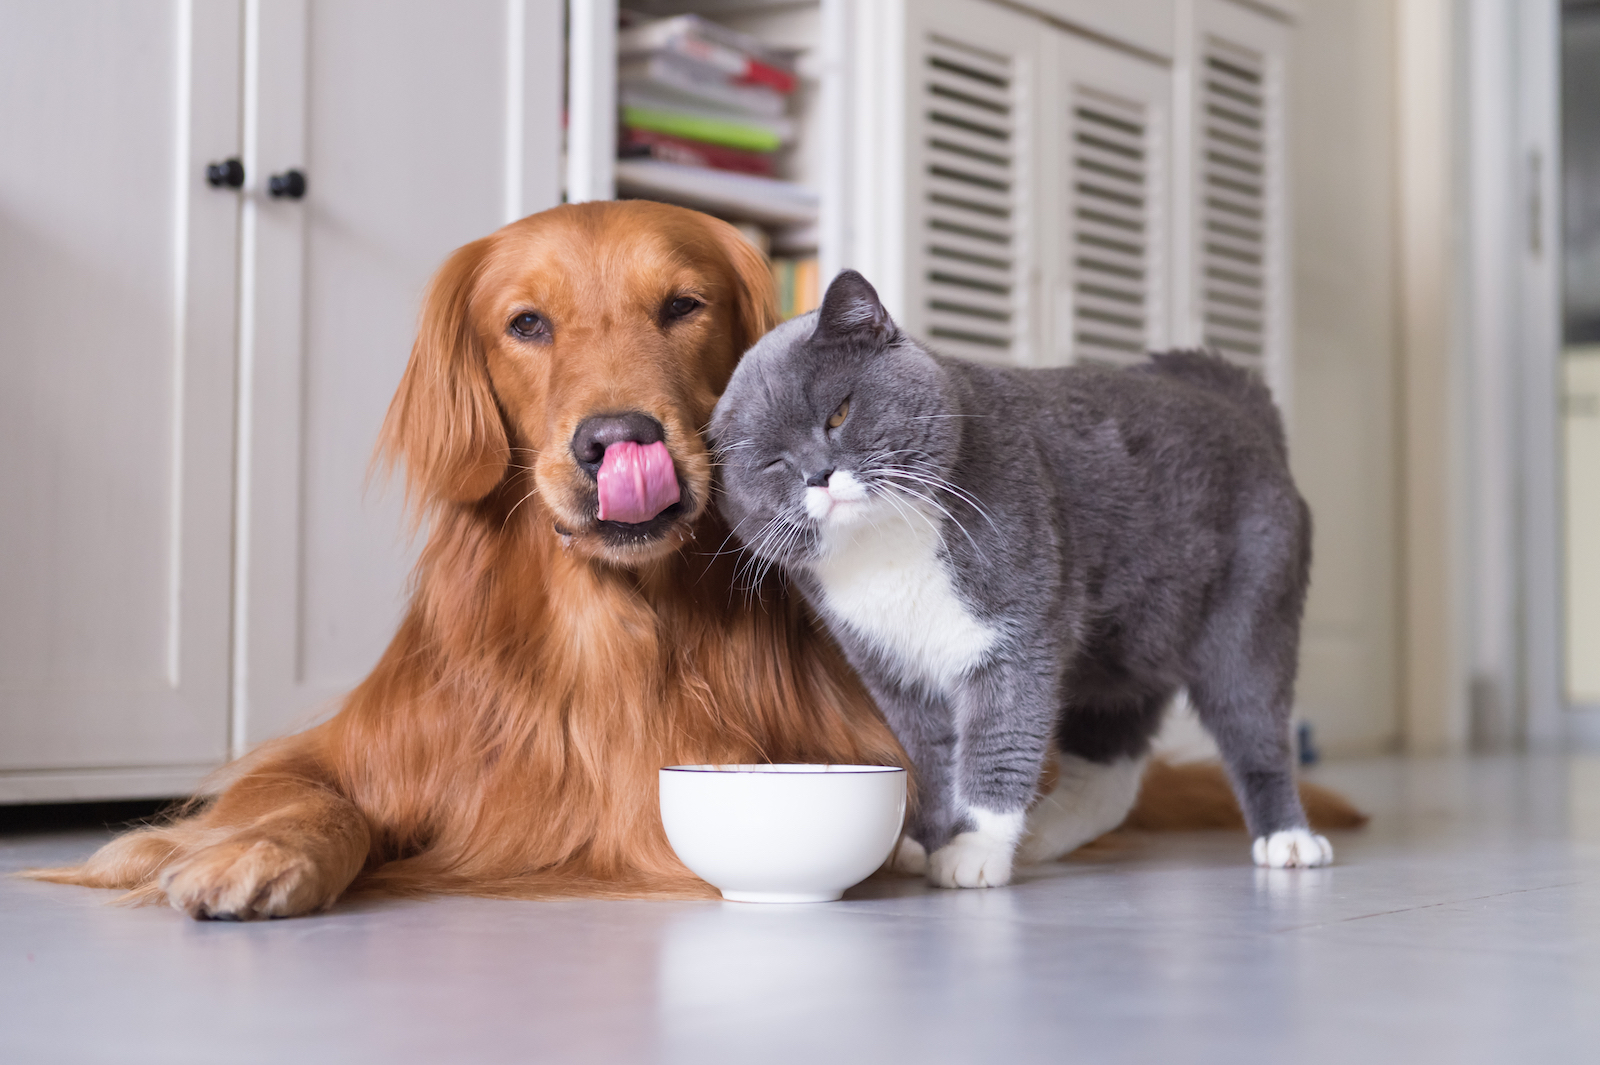 petfood conference, photo by Shutterstock